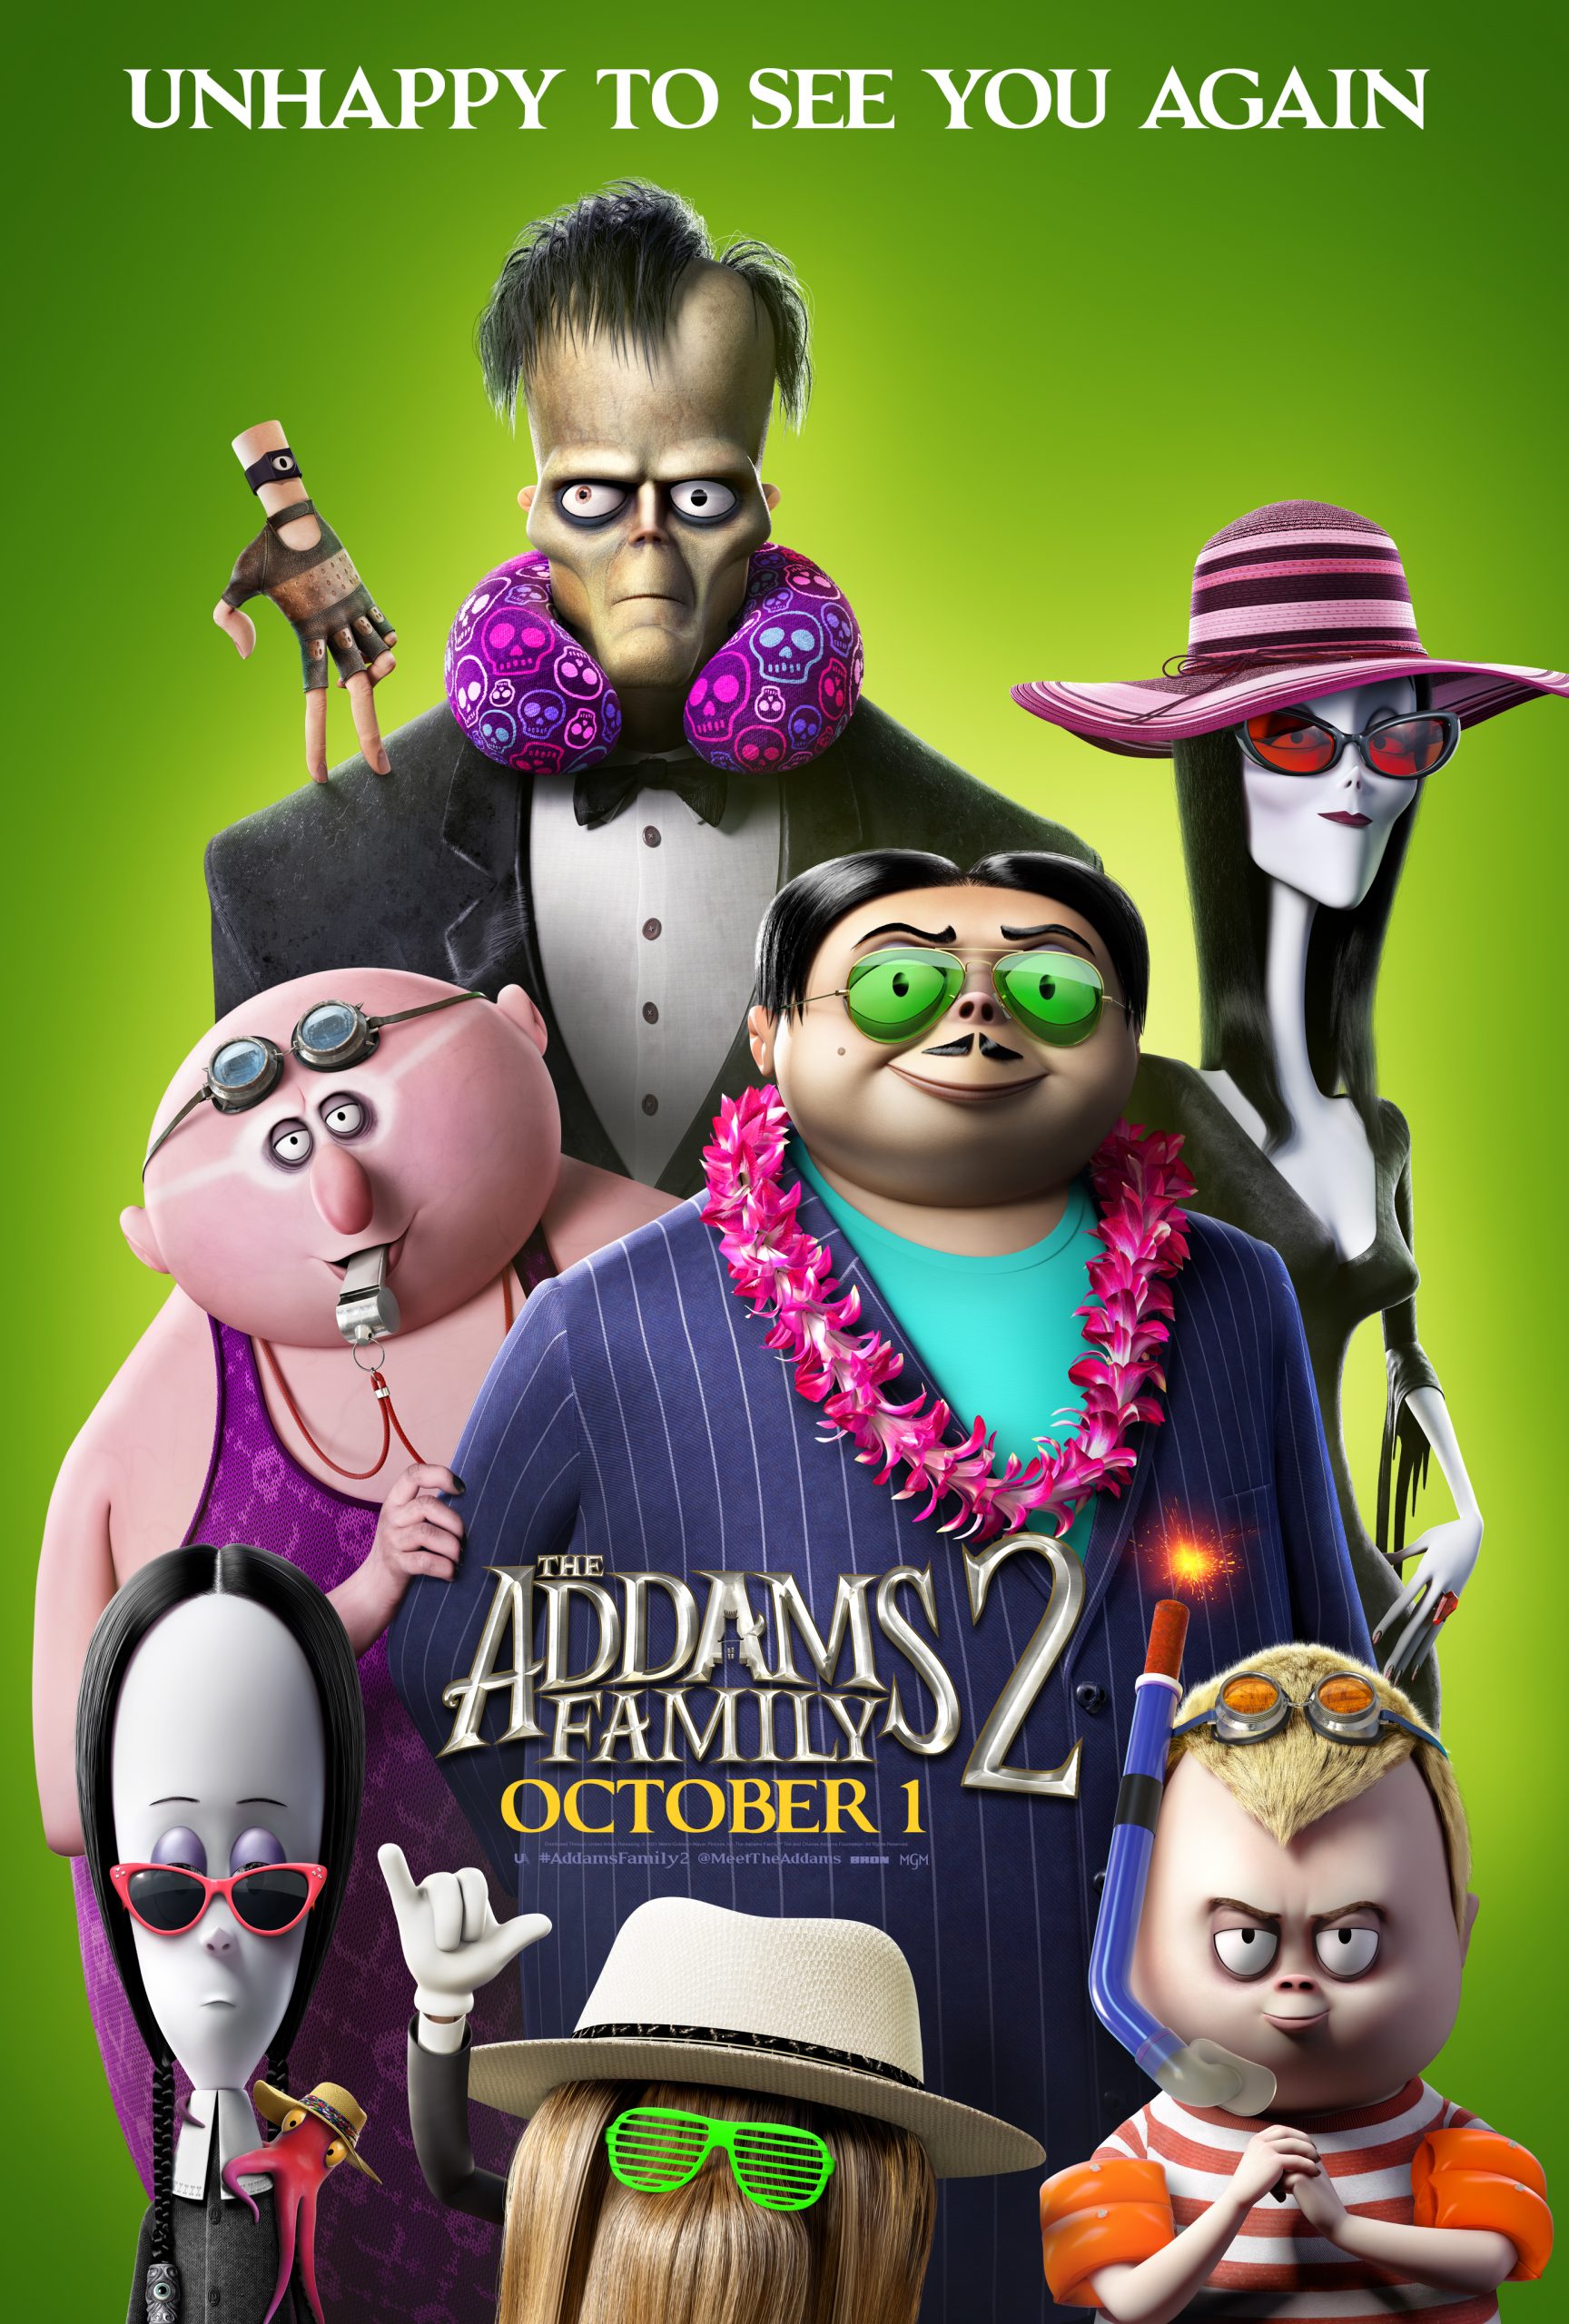 New Movie: The Addams Family 2 Starring Charlize Theron, Snoop Dogg